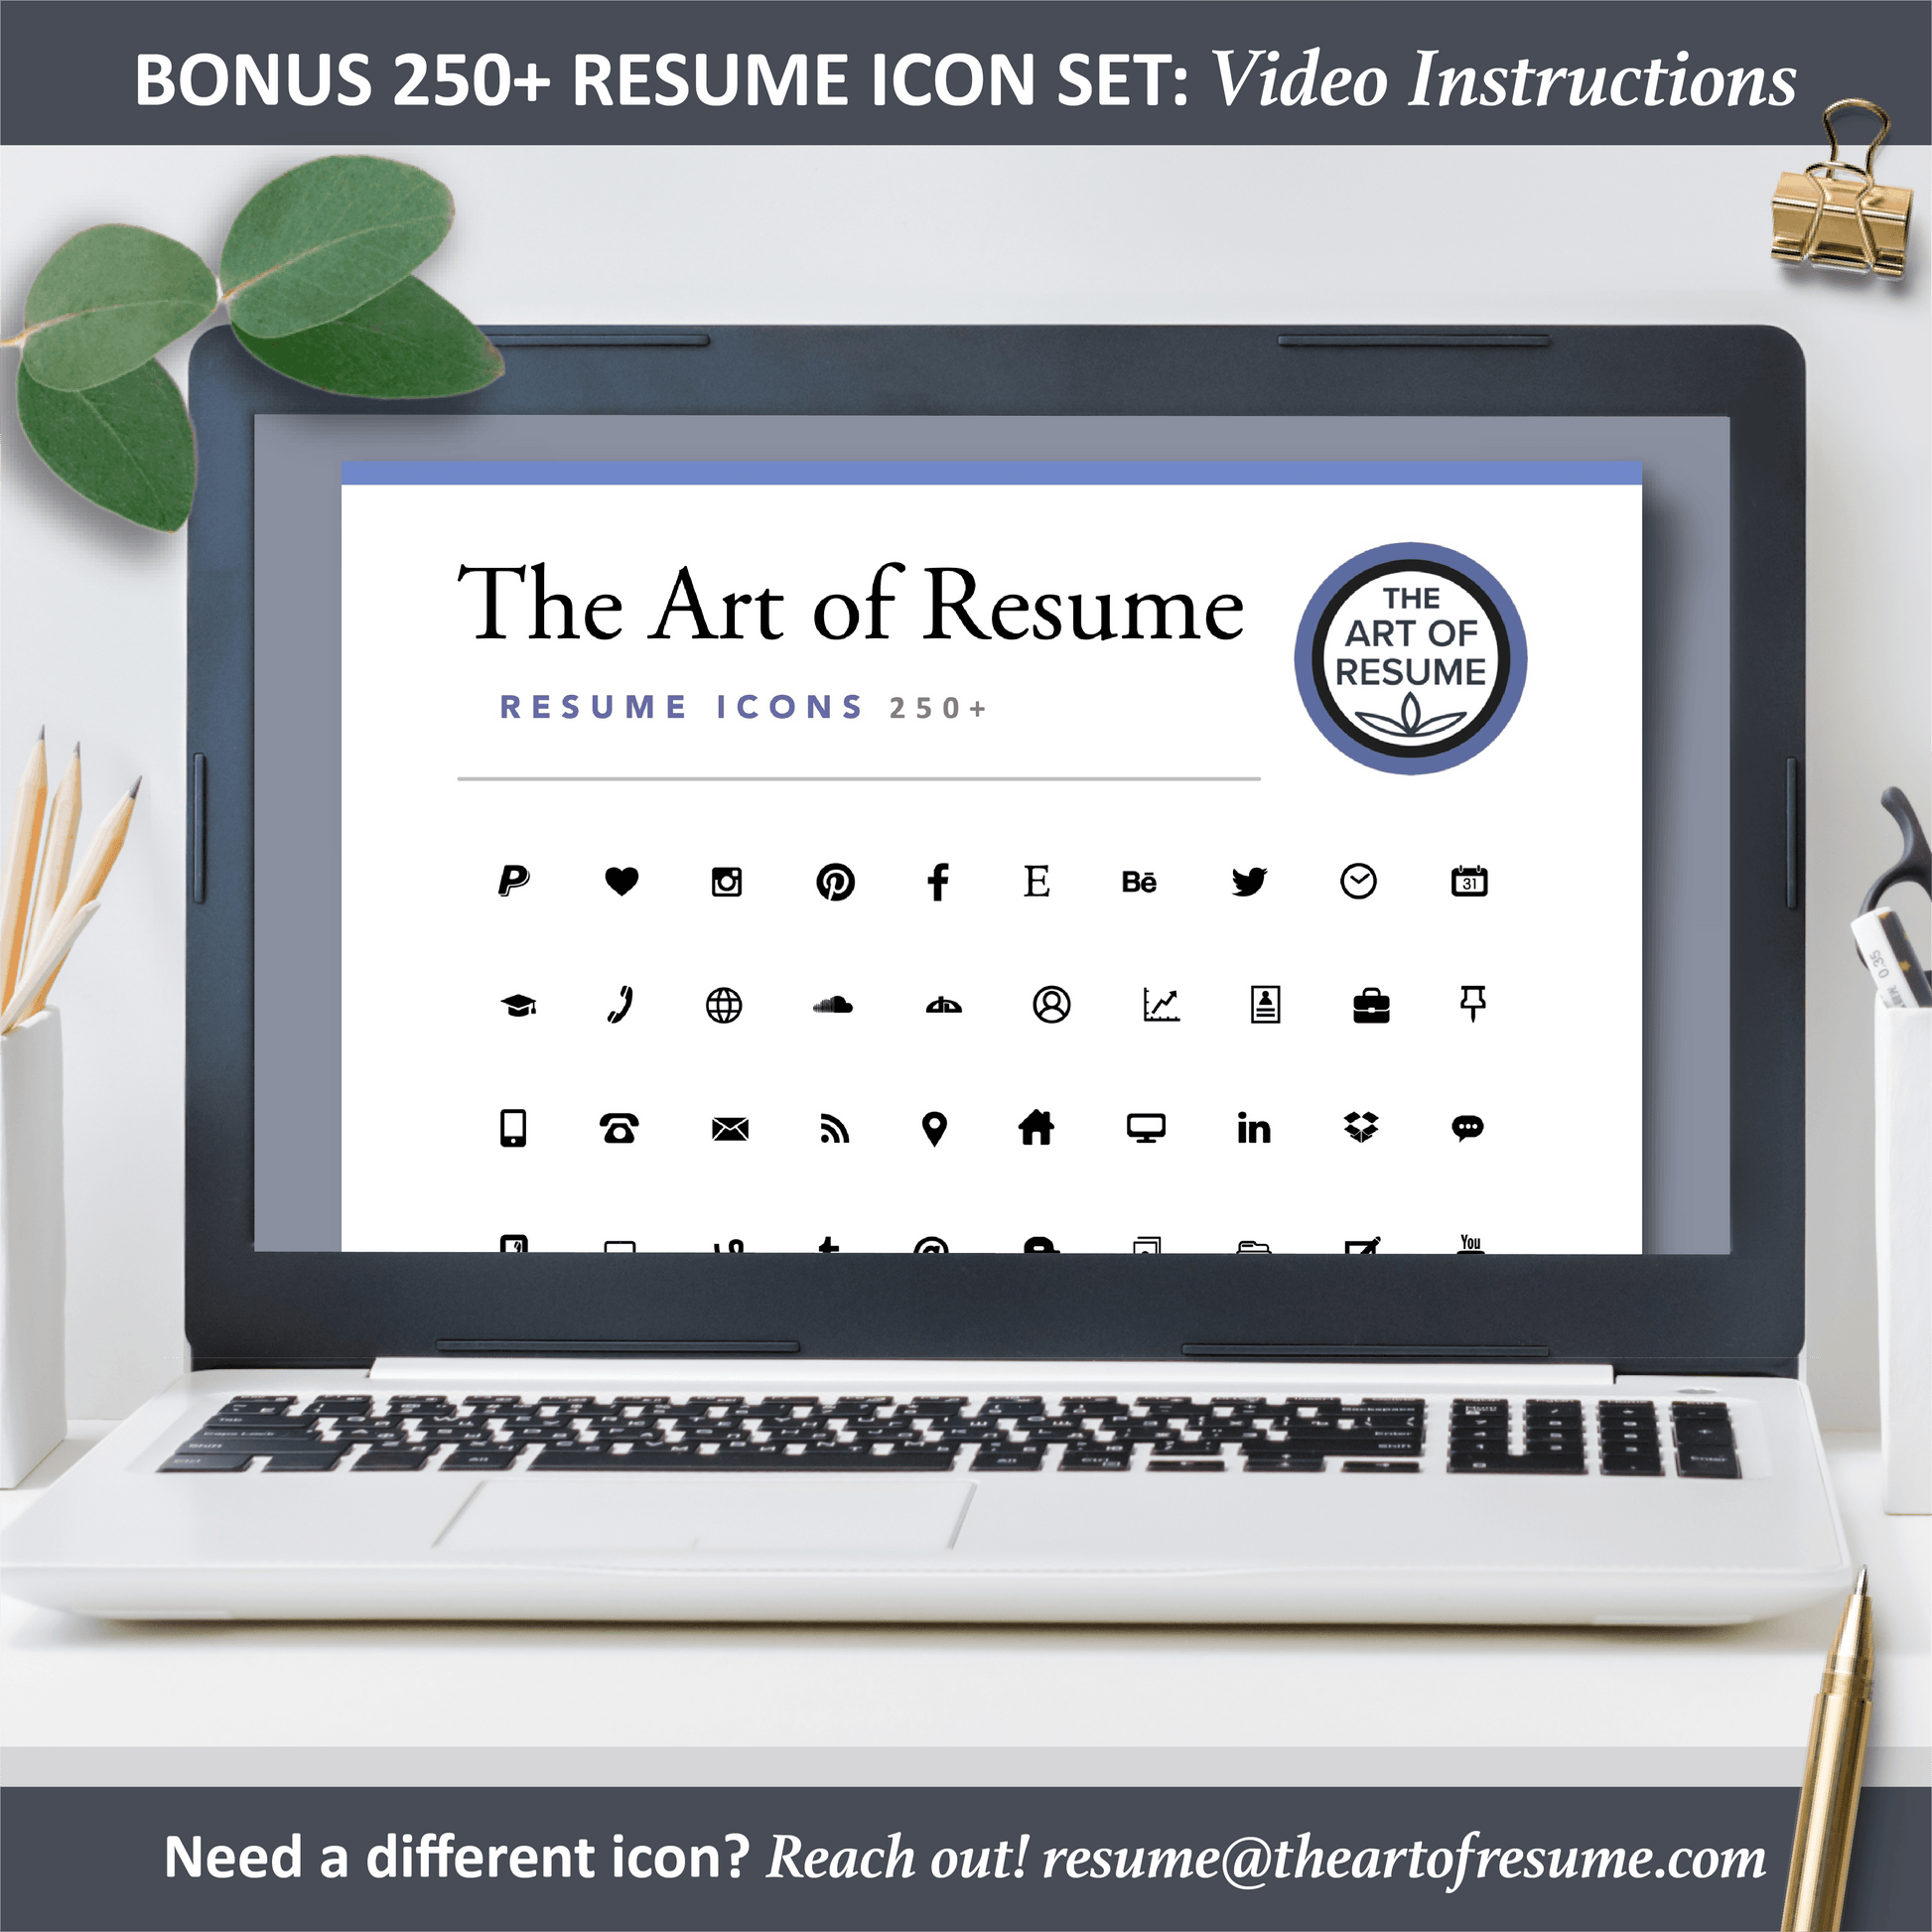 ATS Resume Template Bundle (Applicant Tracking System-Friendly) - The Art of Resume